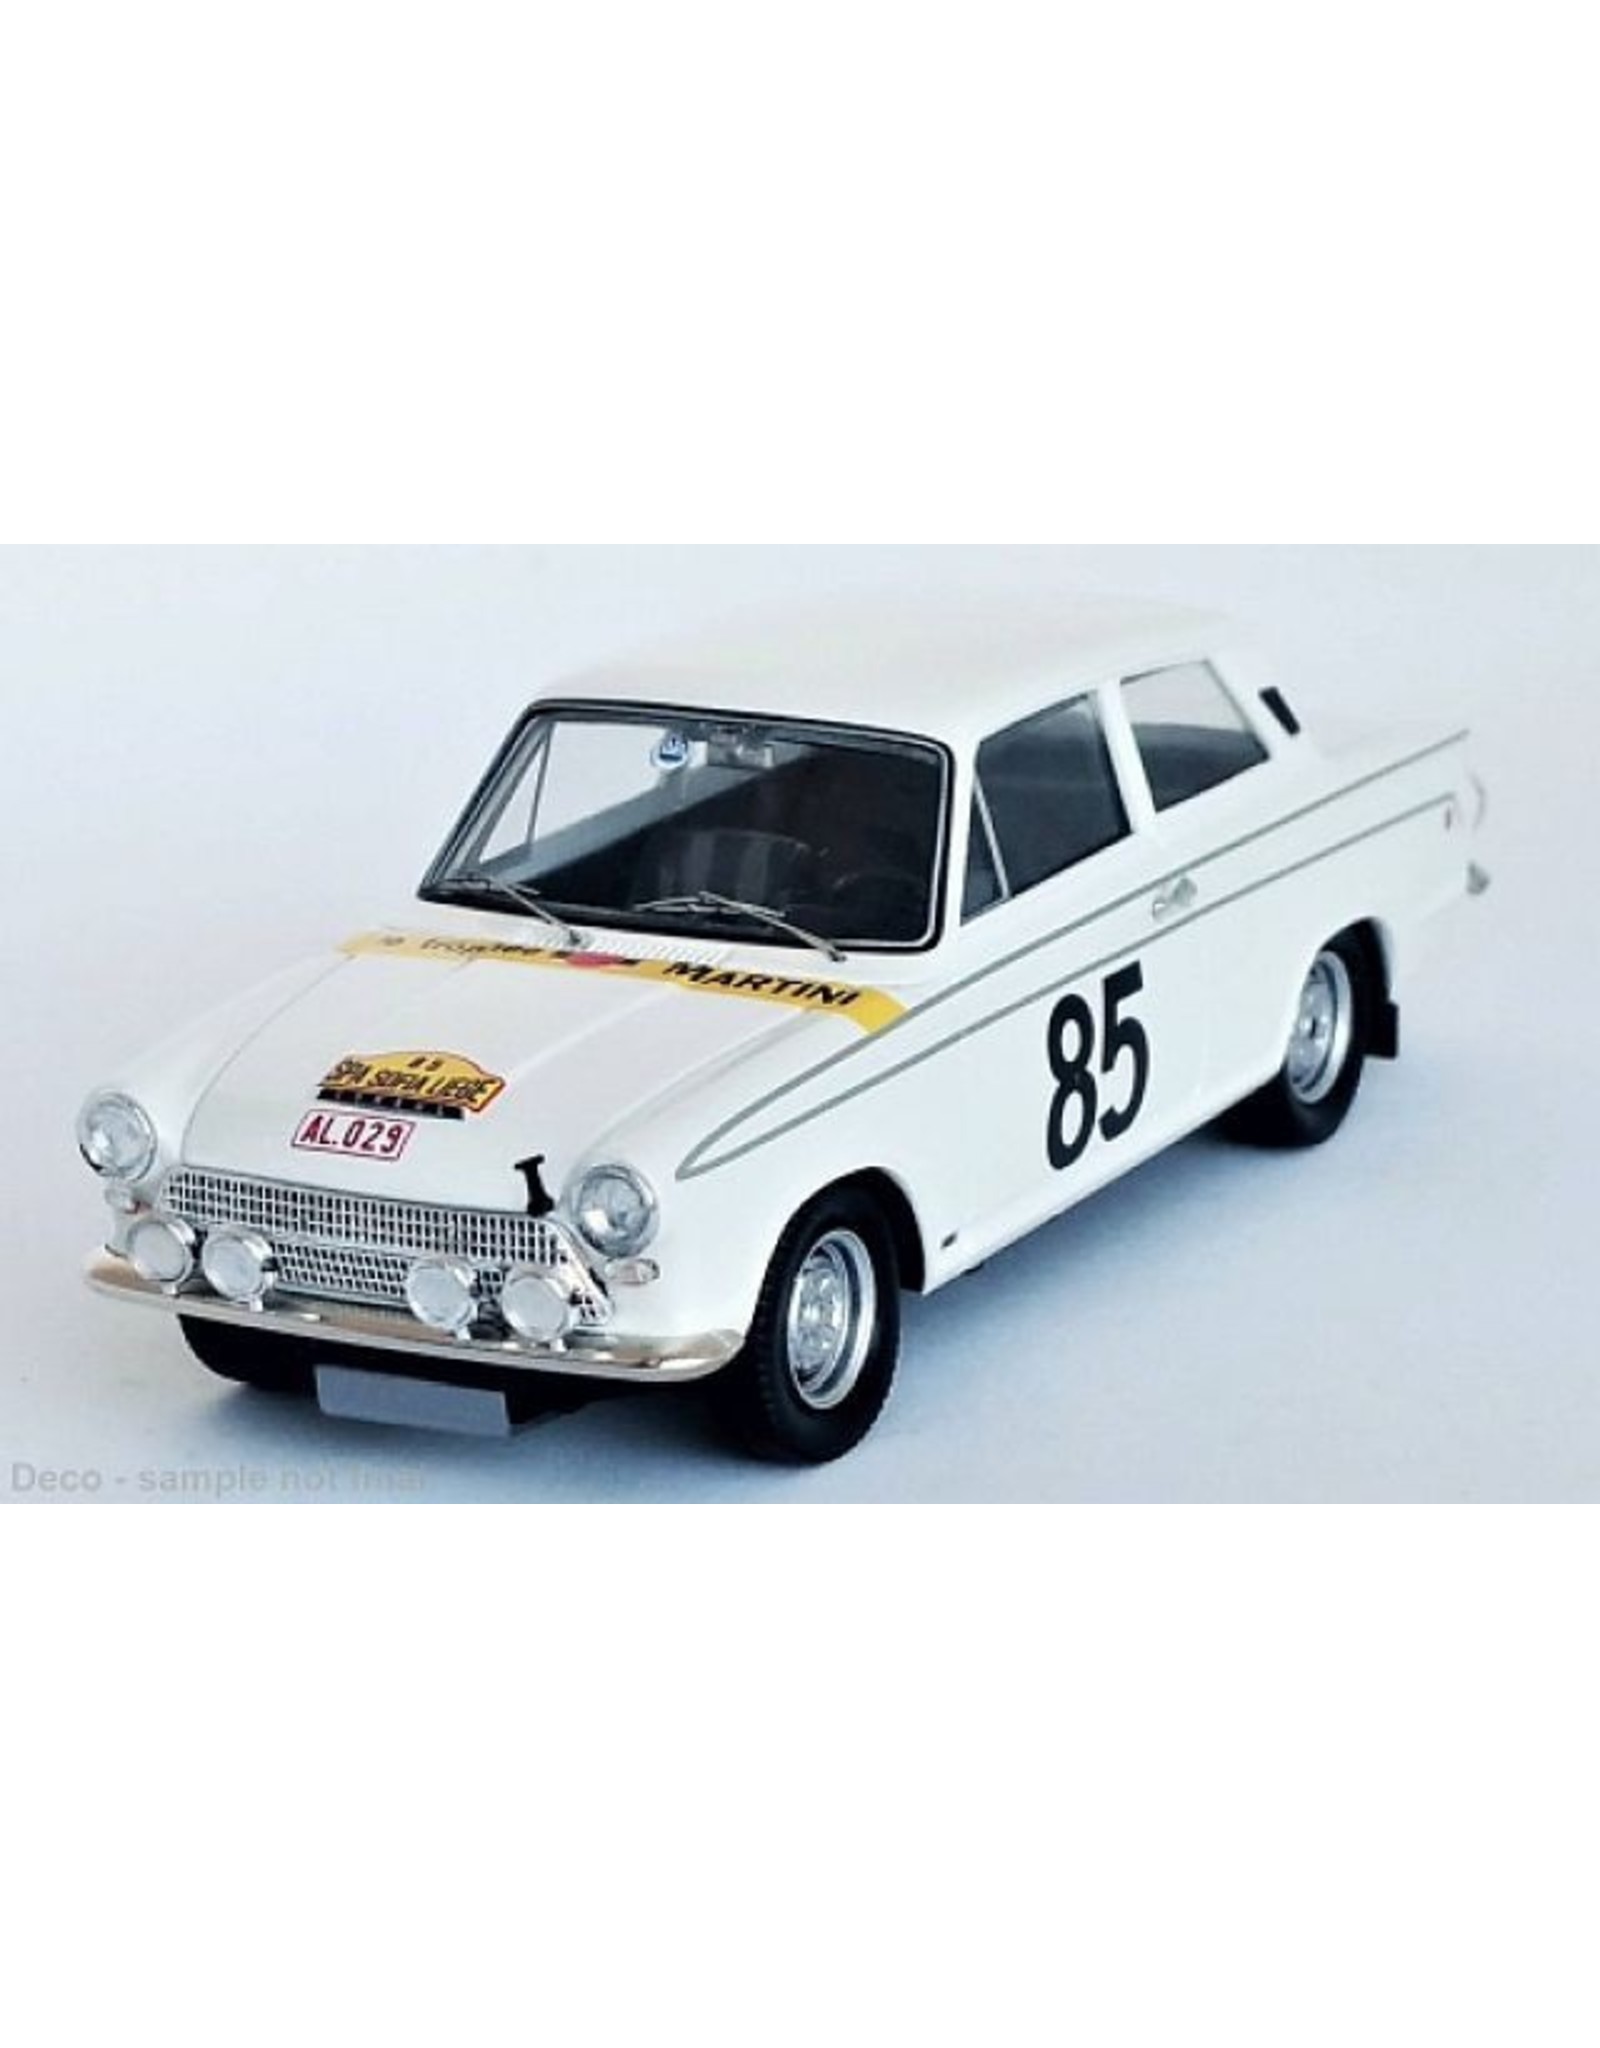 Ford by Lotus Ford Cortina GT(white)No.85,Rally Luik-Rome-Luik(1964)G.Stapelaere/E.Meeuwissen